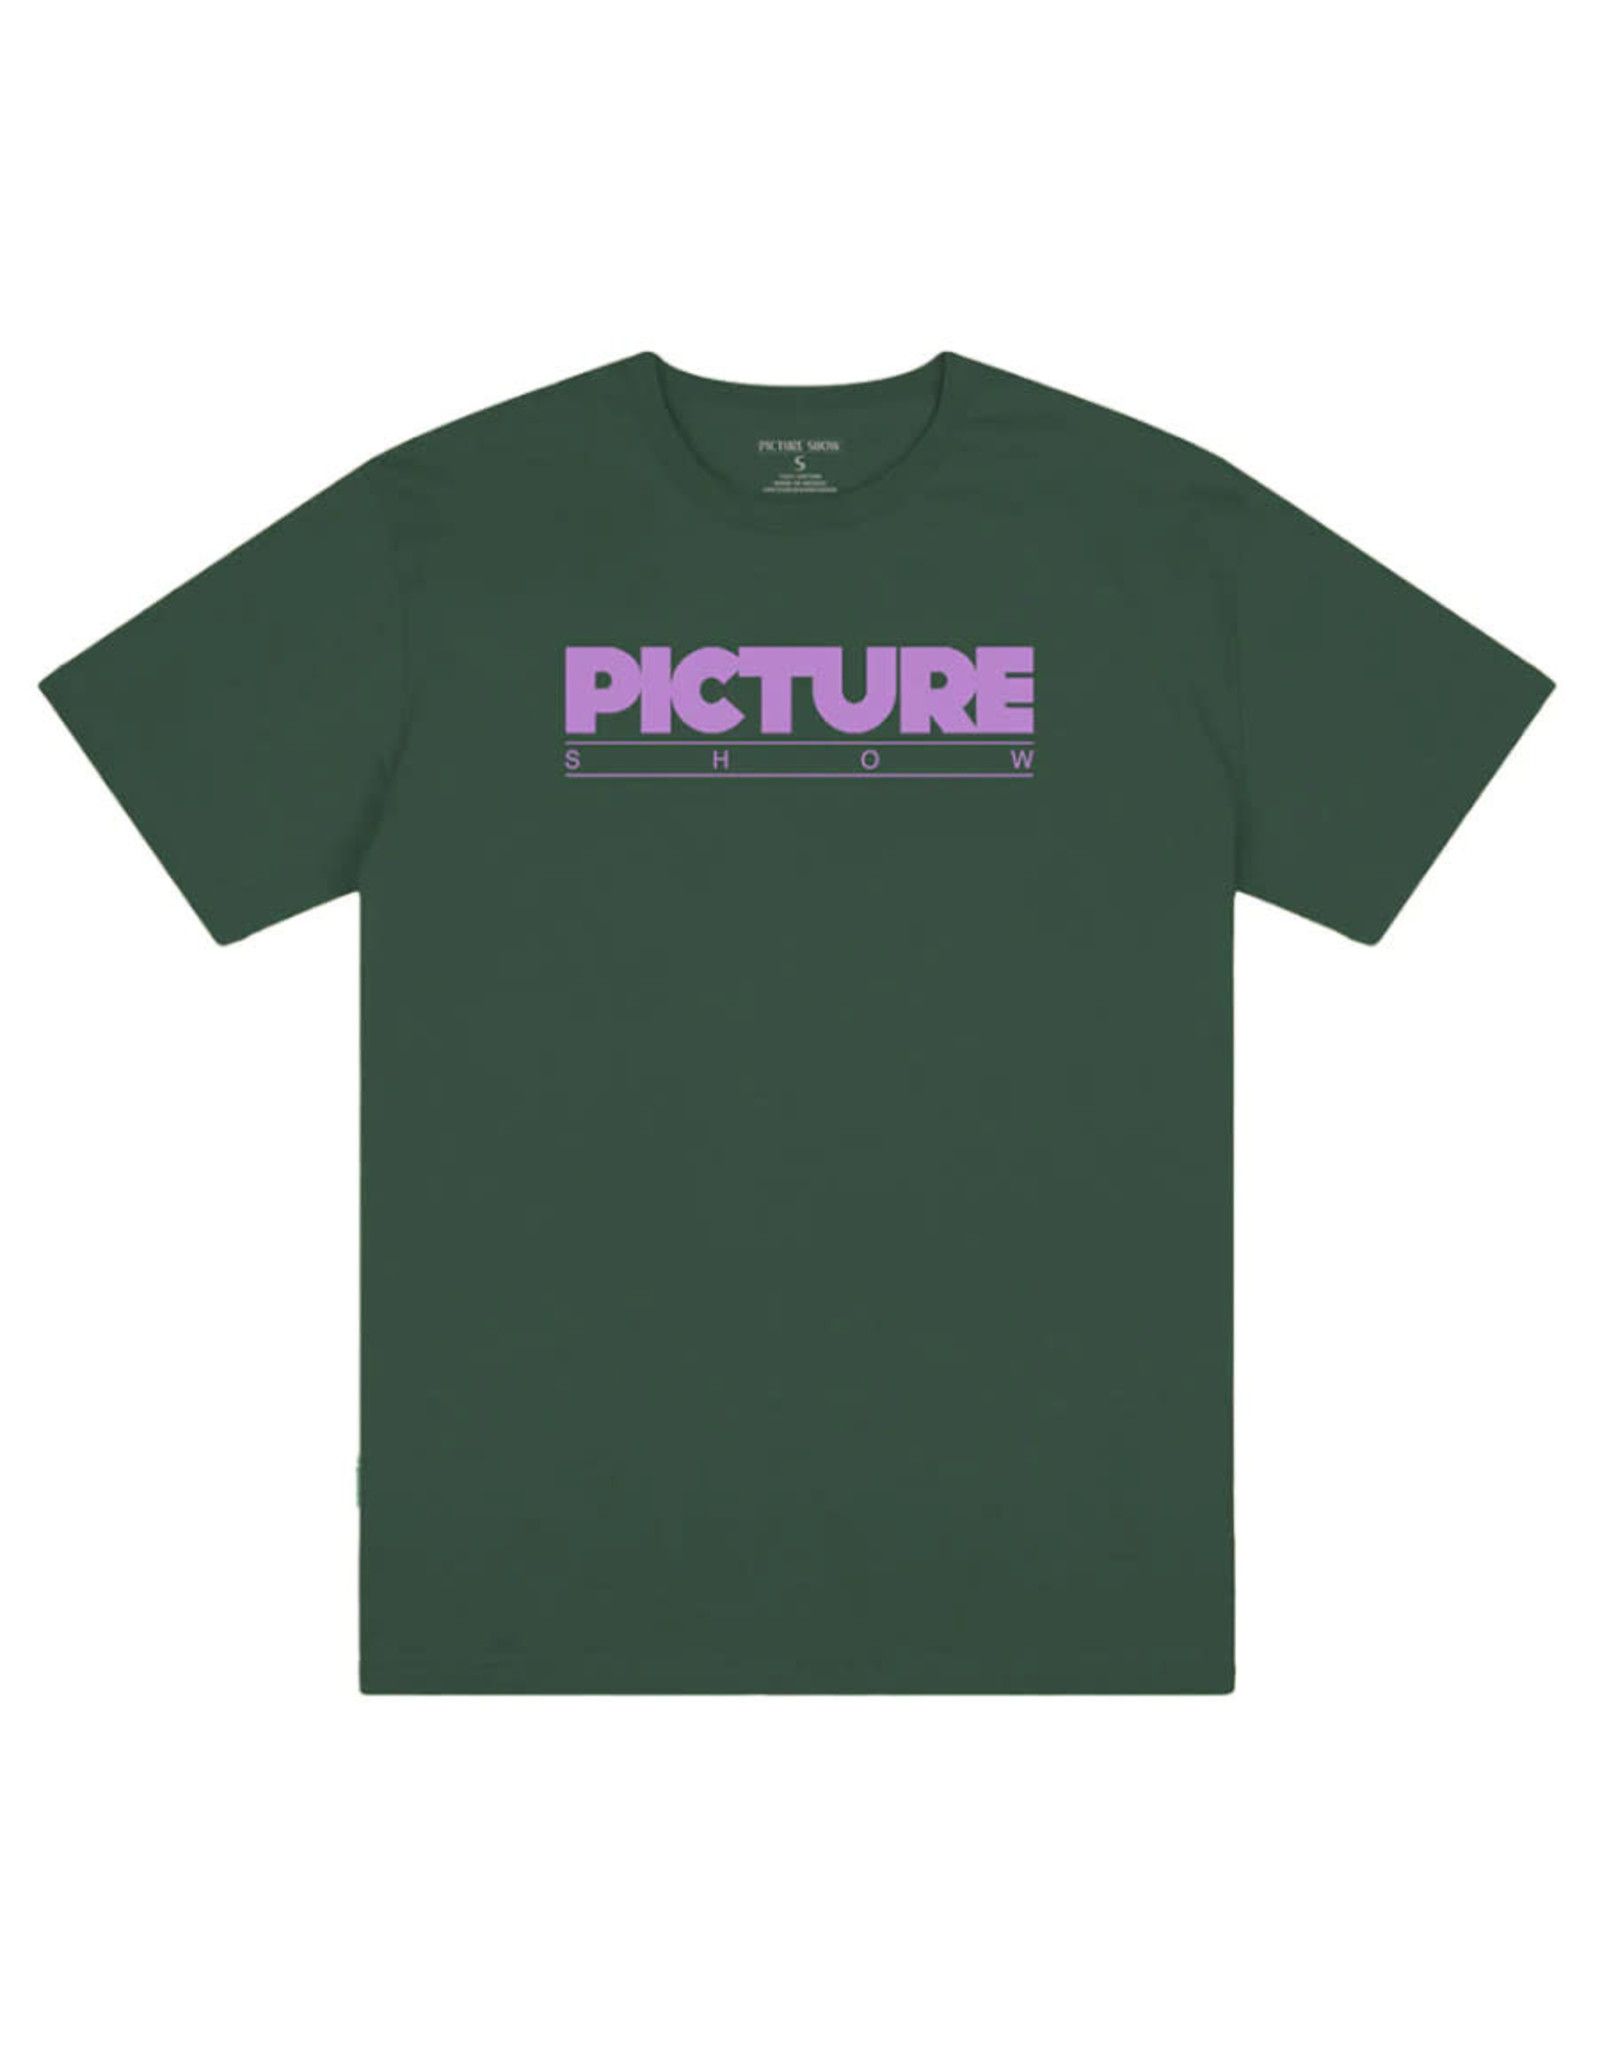 Picture Show Picture Show Tee Studio ID S/S (Forest)